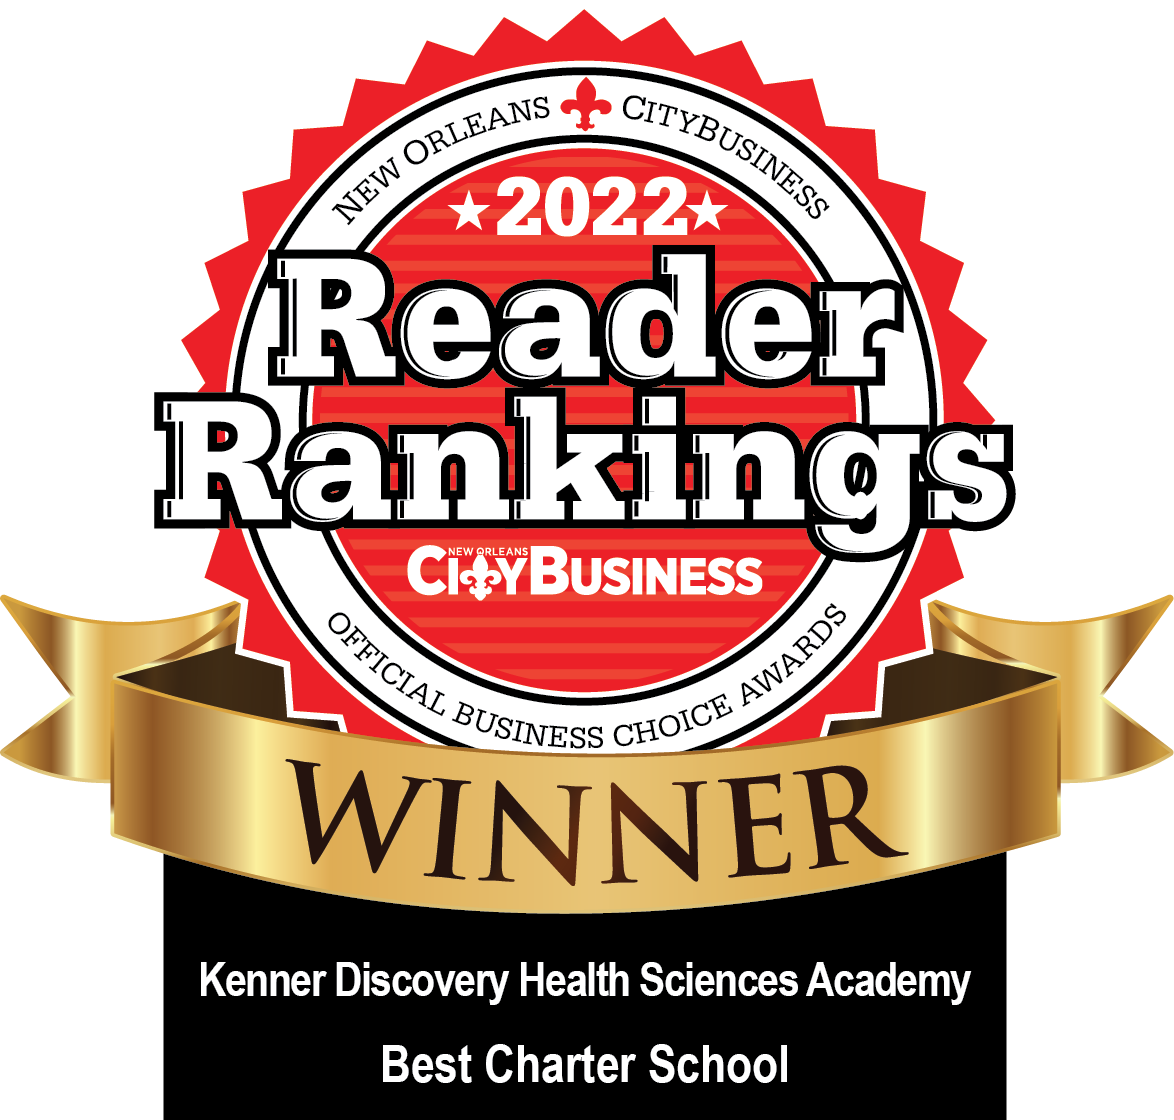 New Orleans 2020 Reader Rankings City Business Top Winner Kenner Discovery Health Sciences Academy Best Charter School